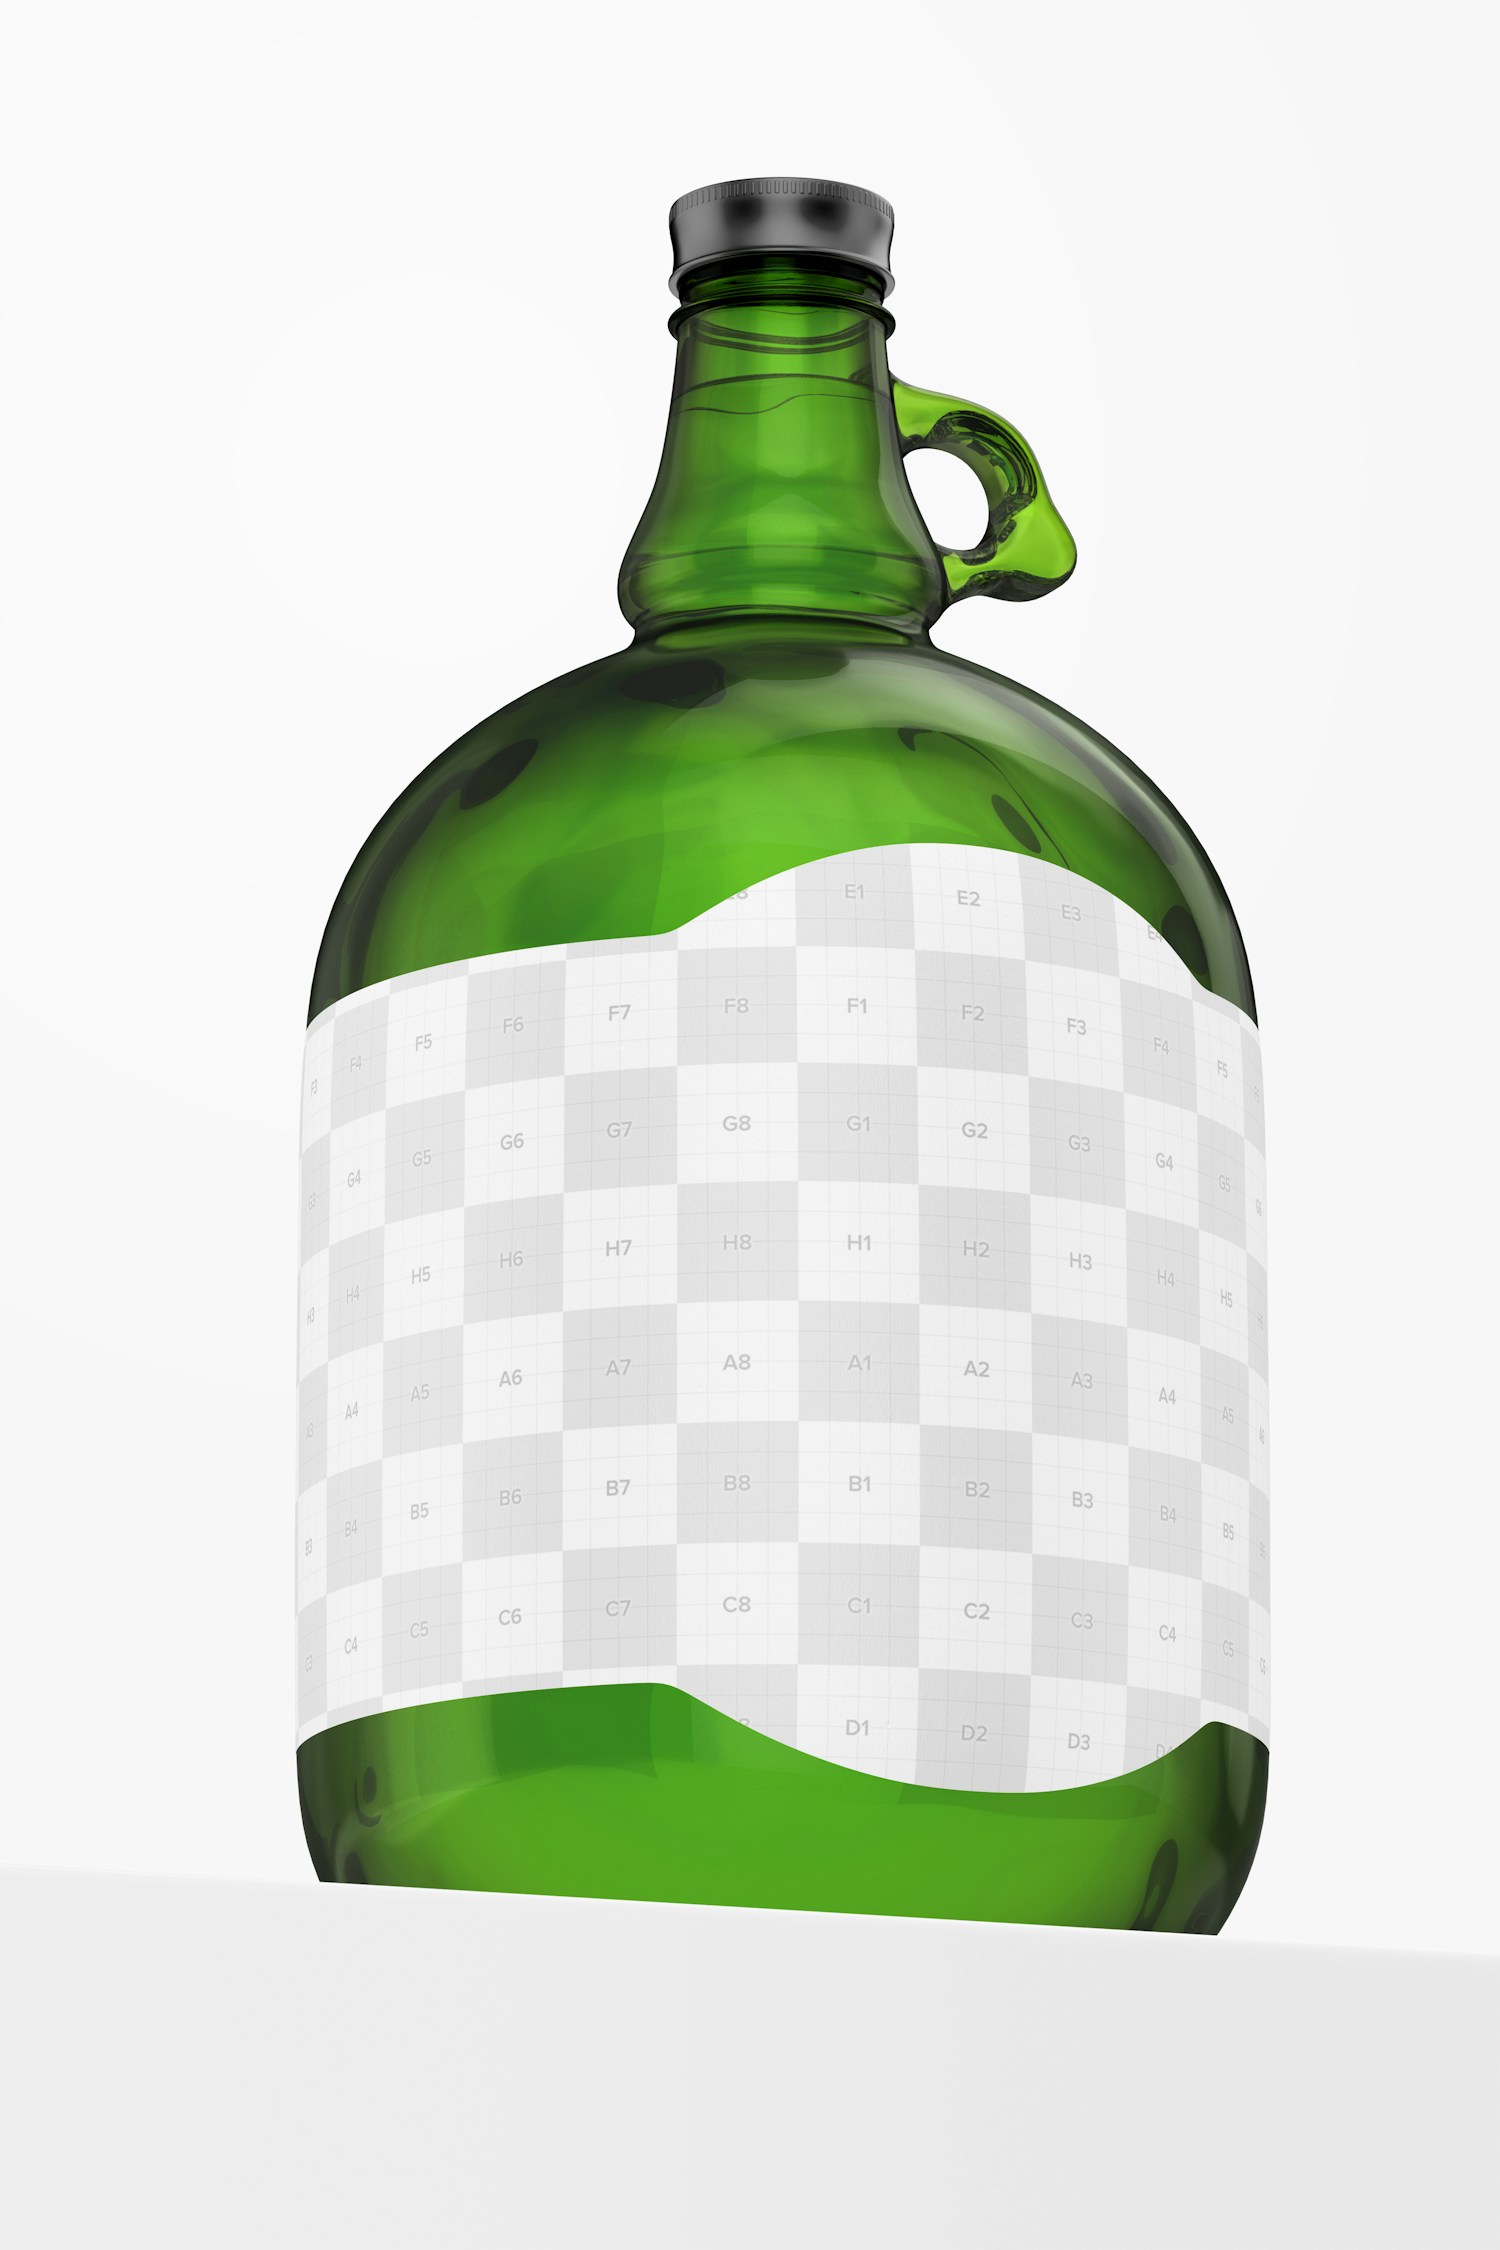 Glass Beer Bottle with Handle Mockup, Low Angle View